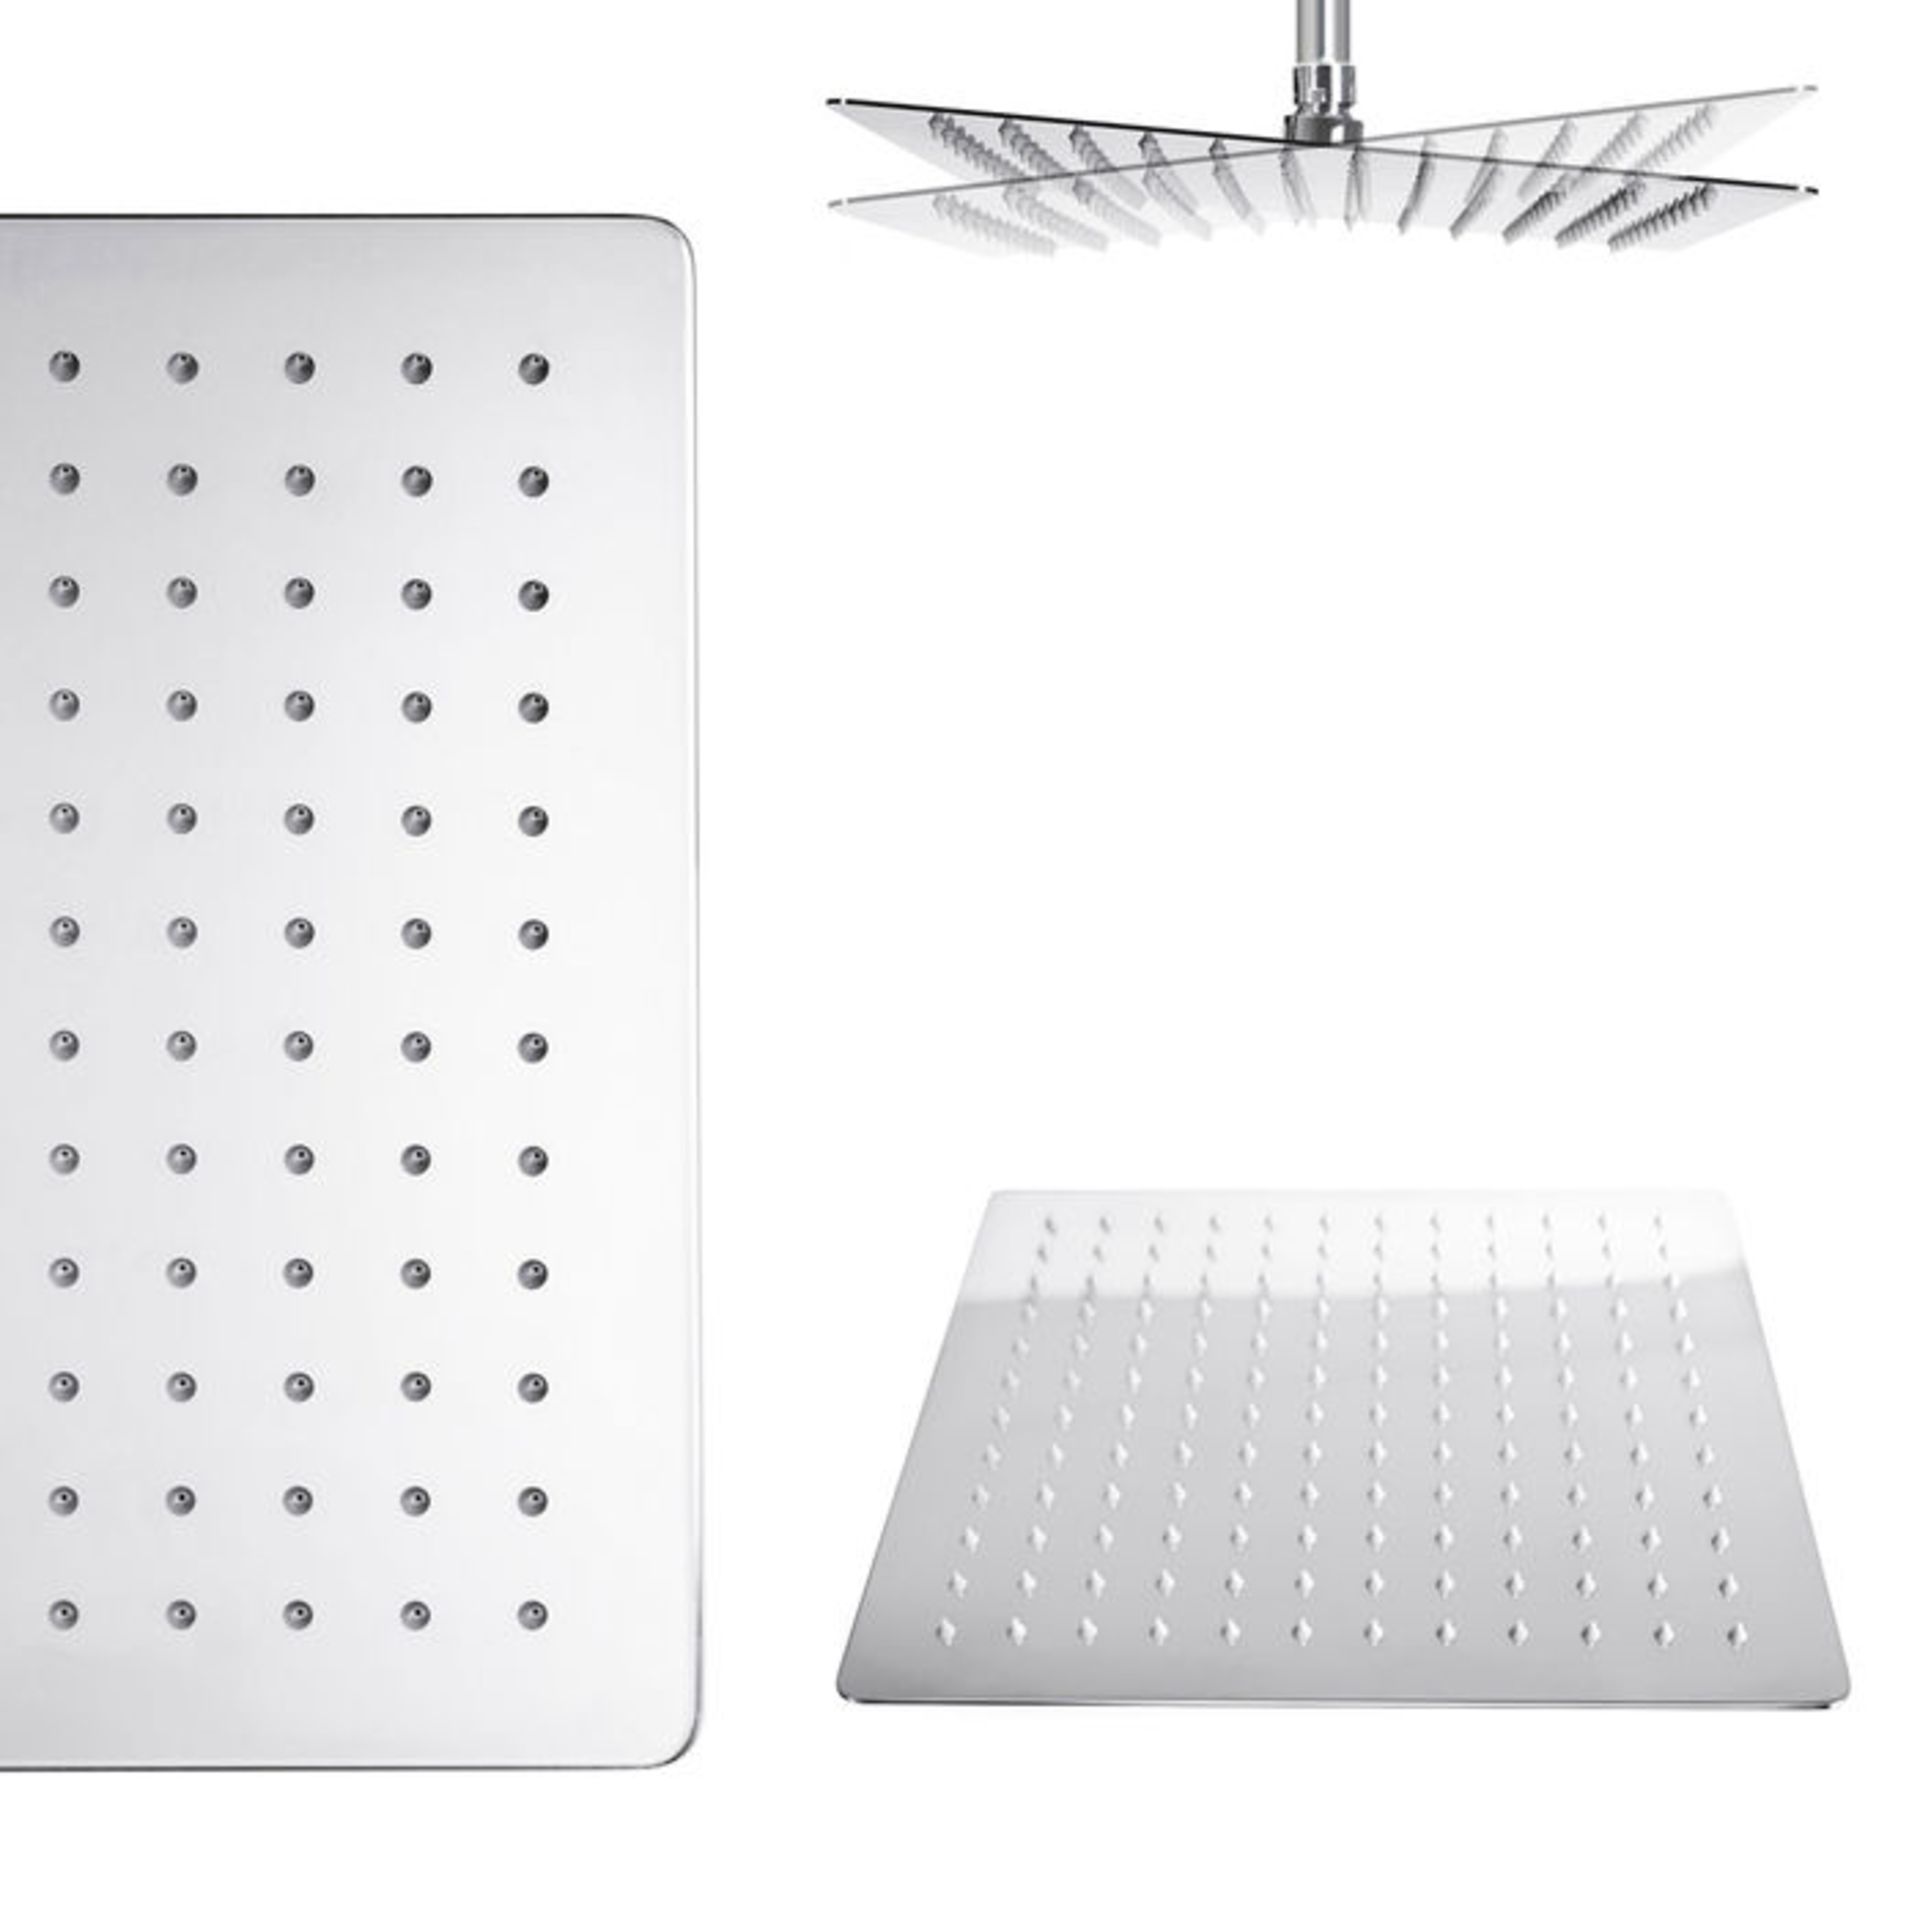 (M1021) Stainless Steel 300mm Square Shower Head Solid metal structure Can be wall or ceiling... - Image 2 of 2